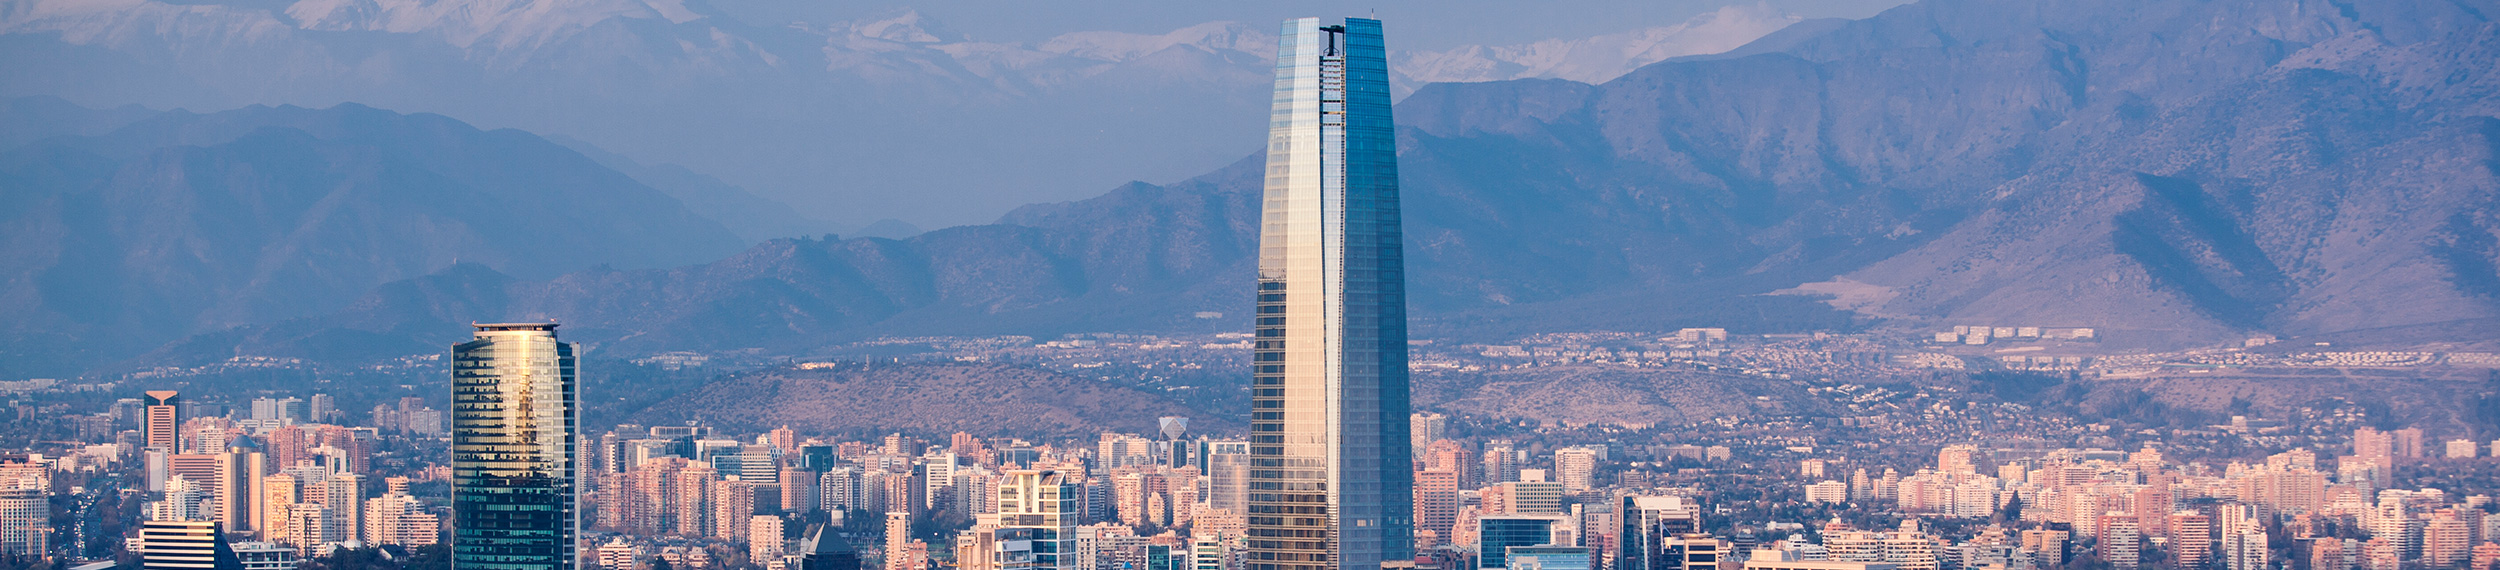 Cityscape view of Santiago financial district with mountains in distance, Chile